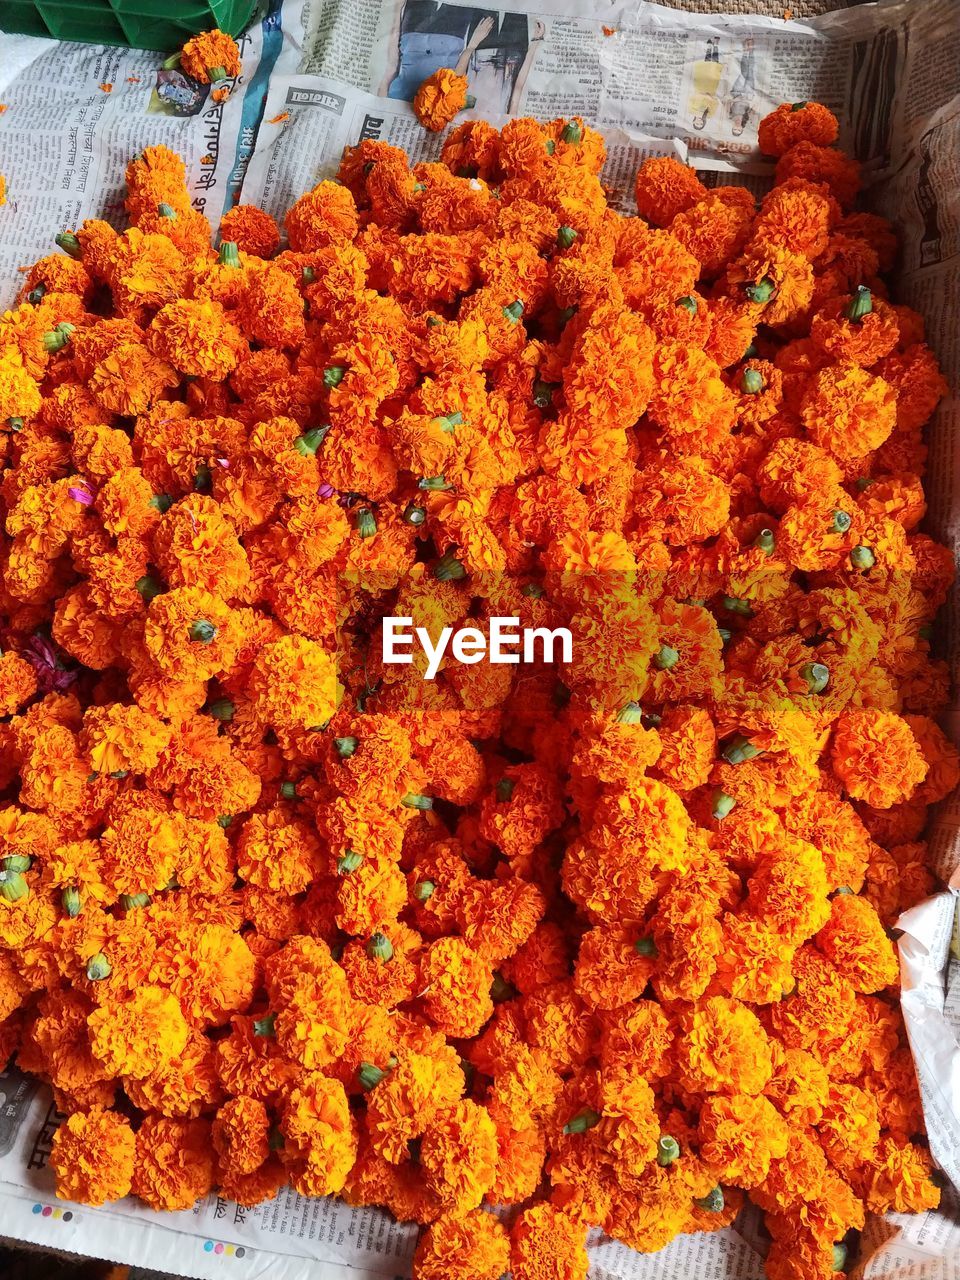 HIGH ANGLE VIEW OF ORANGE FLOWERING PLANTS